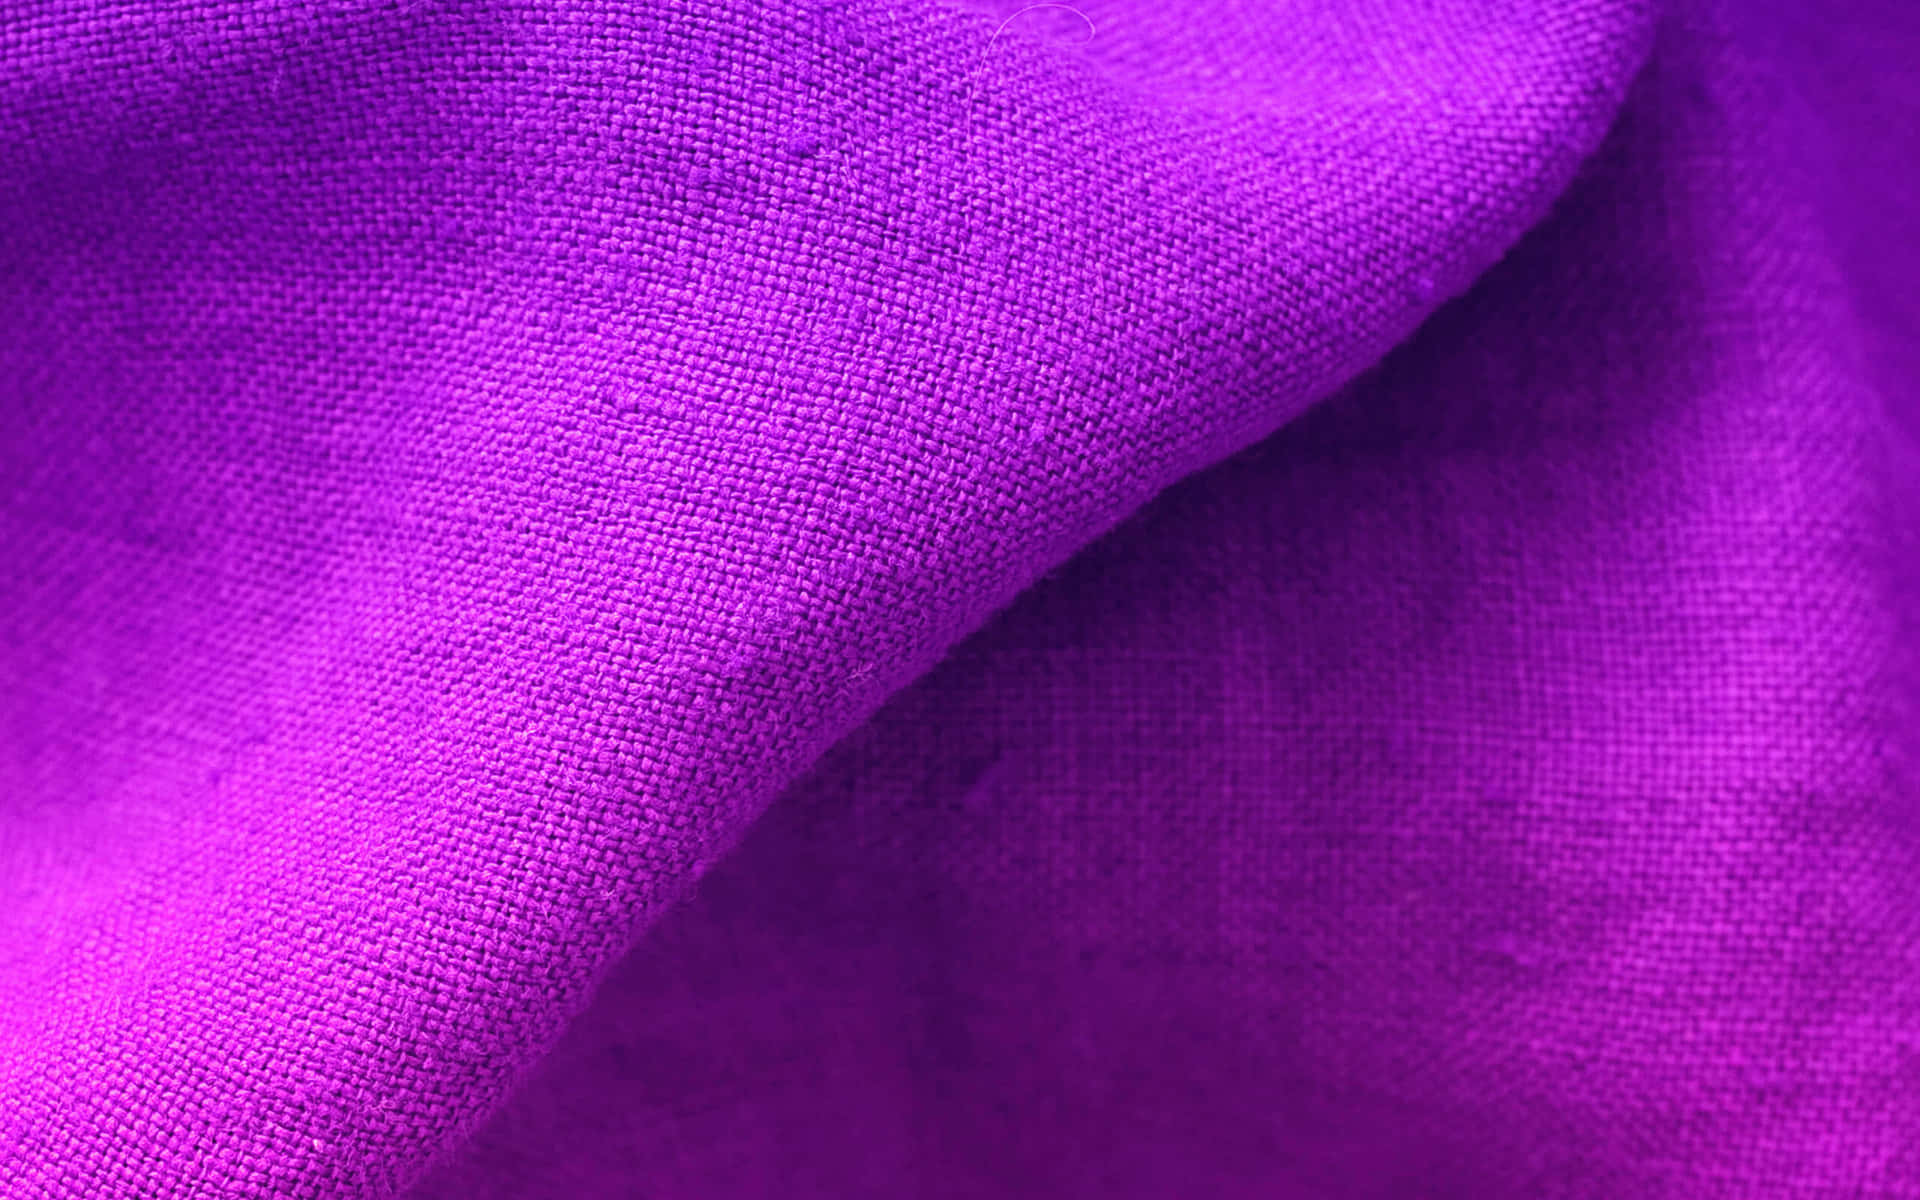 Our luxurious and effortless purple fabrics bring unparalleled beauty to your home. Wallpaper